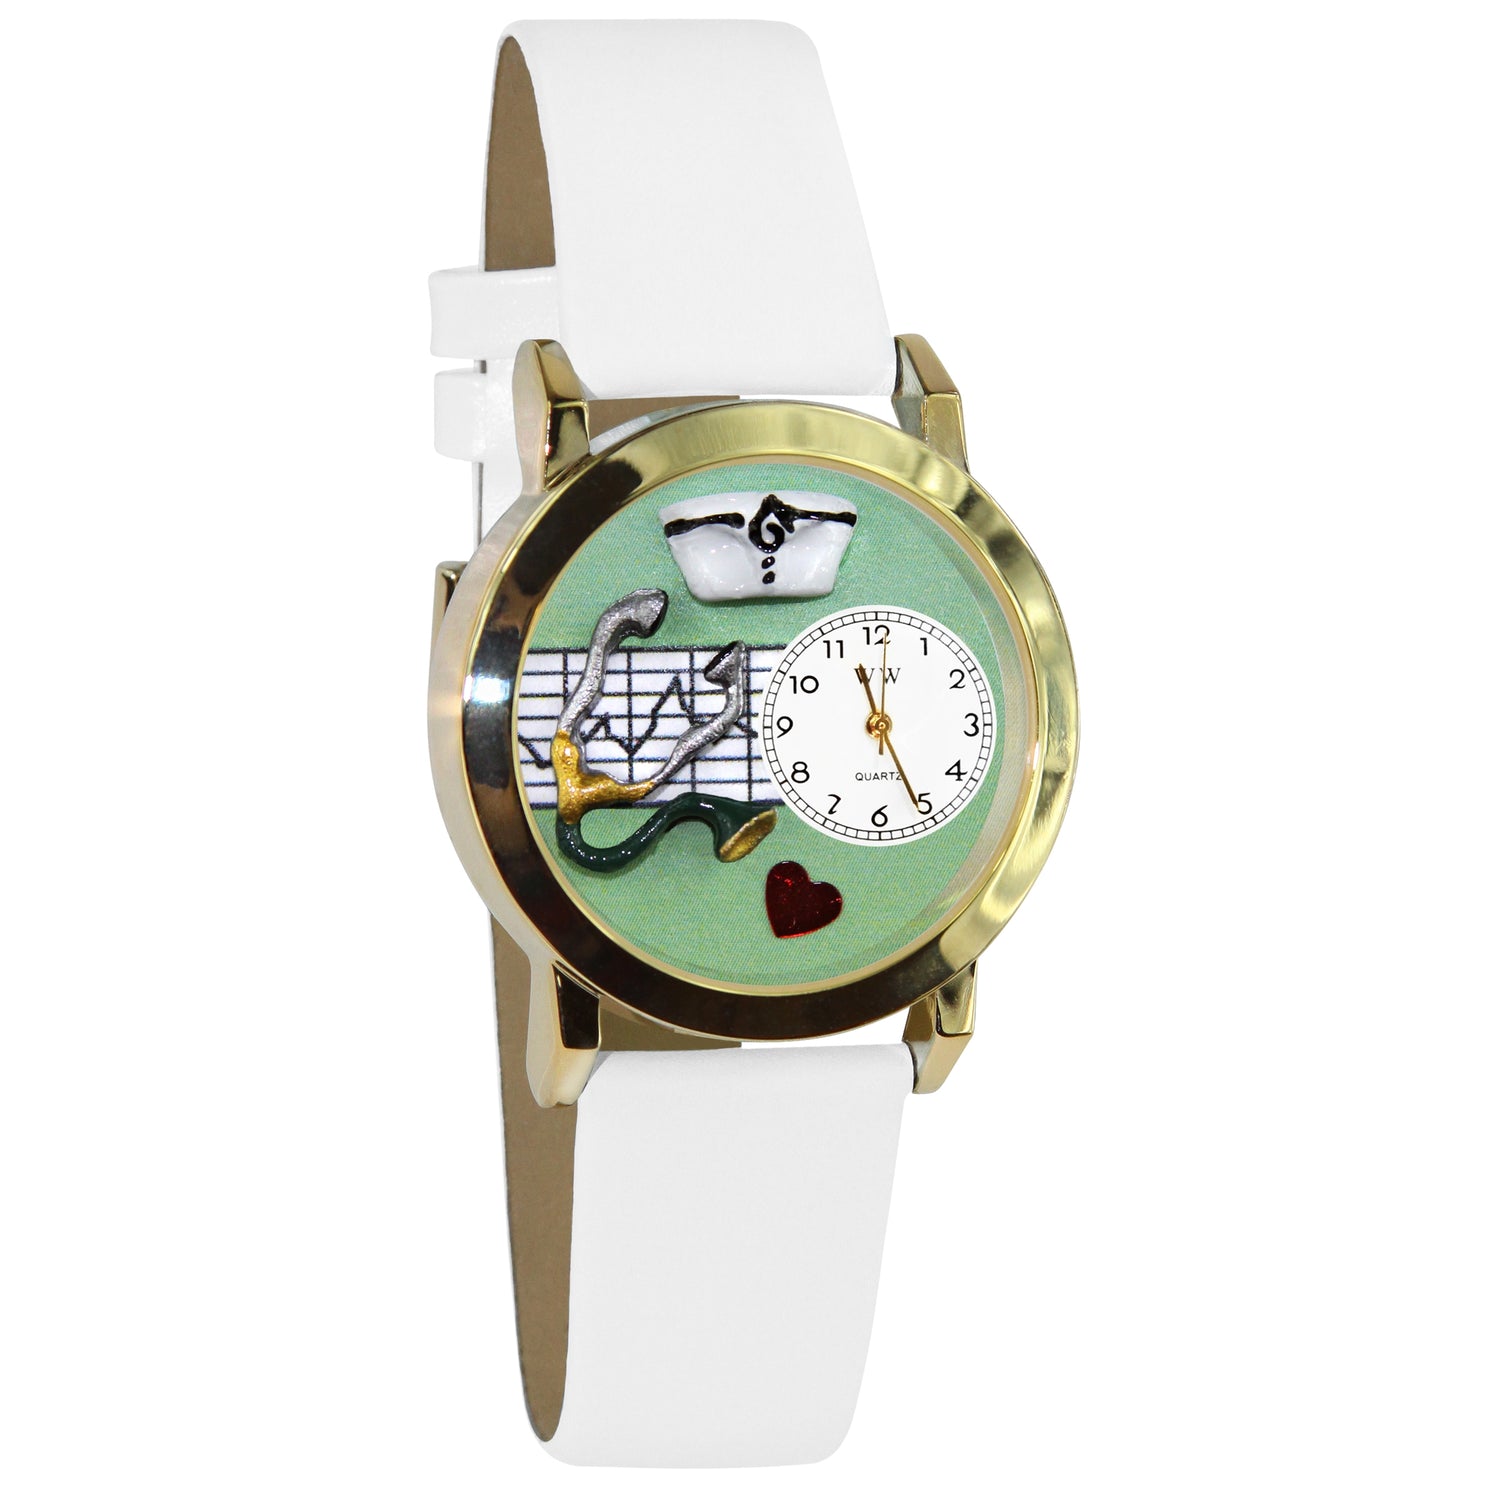 Whimsical Gifts | Nurse Green 3D Watch Small Style | Handmade in USA | Professions Themed | Nurse | Novelty Unique Fun Miniatures Gift | Gold Finish White Leather Watch Band